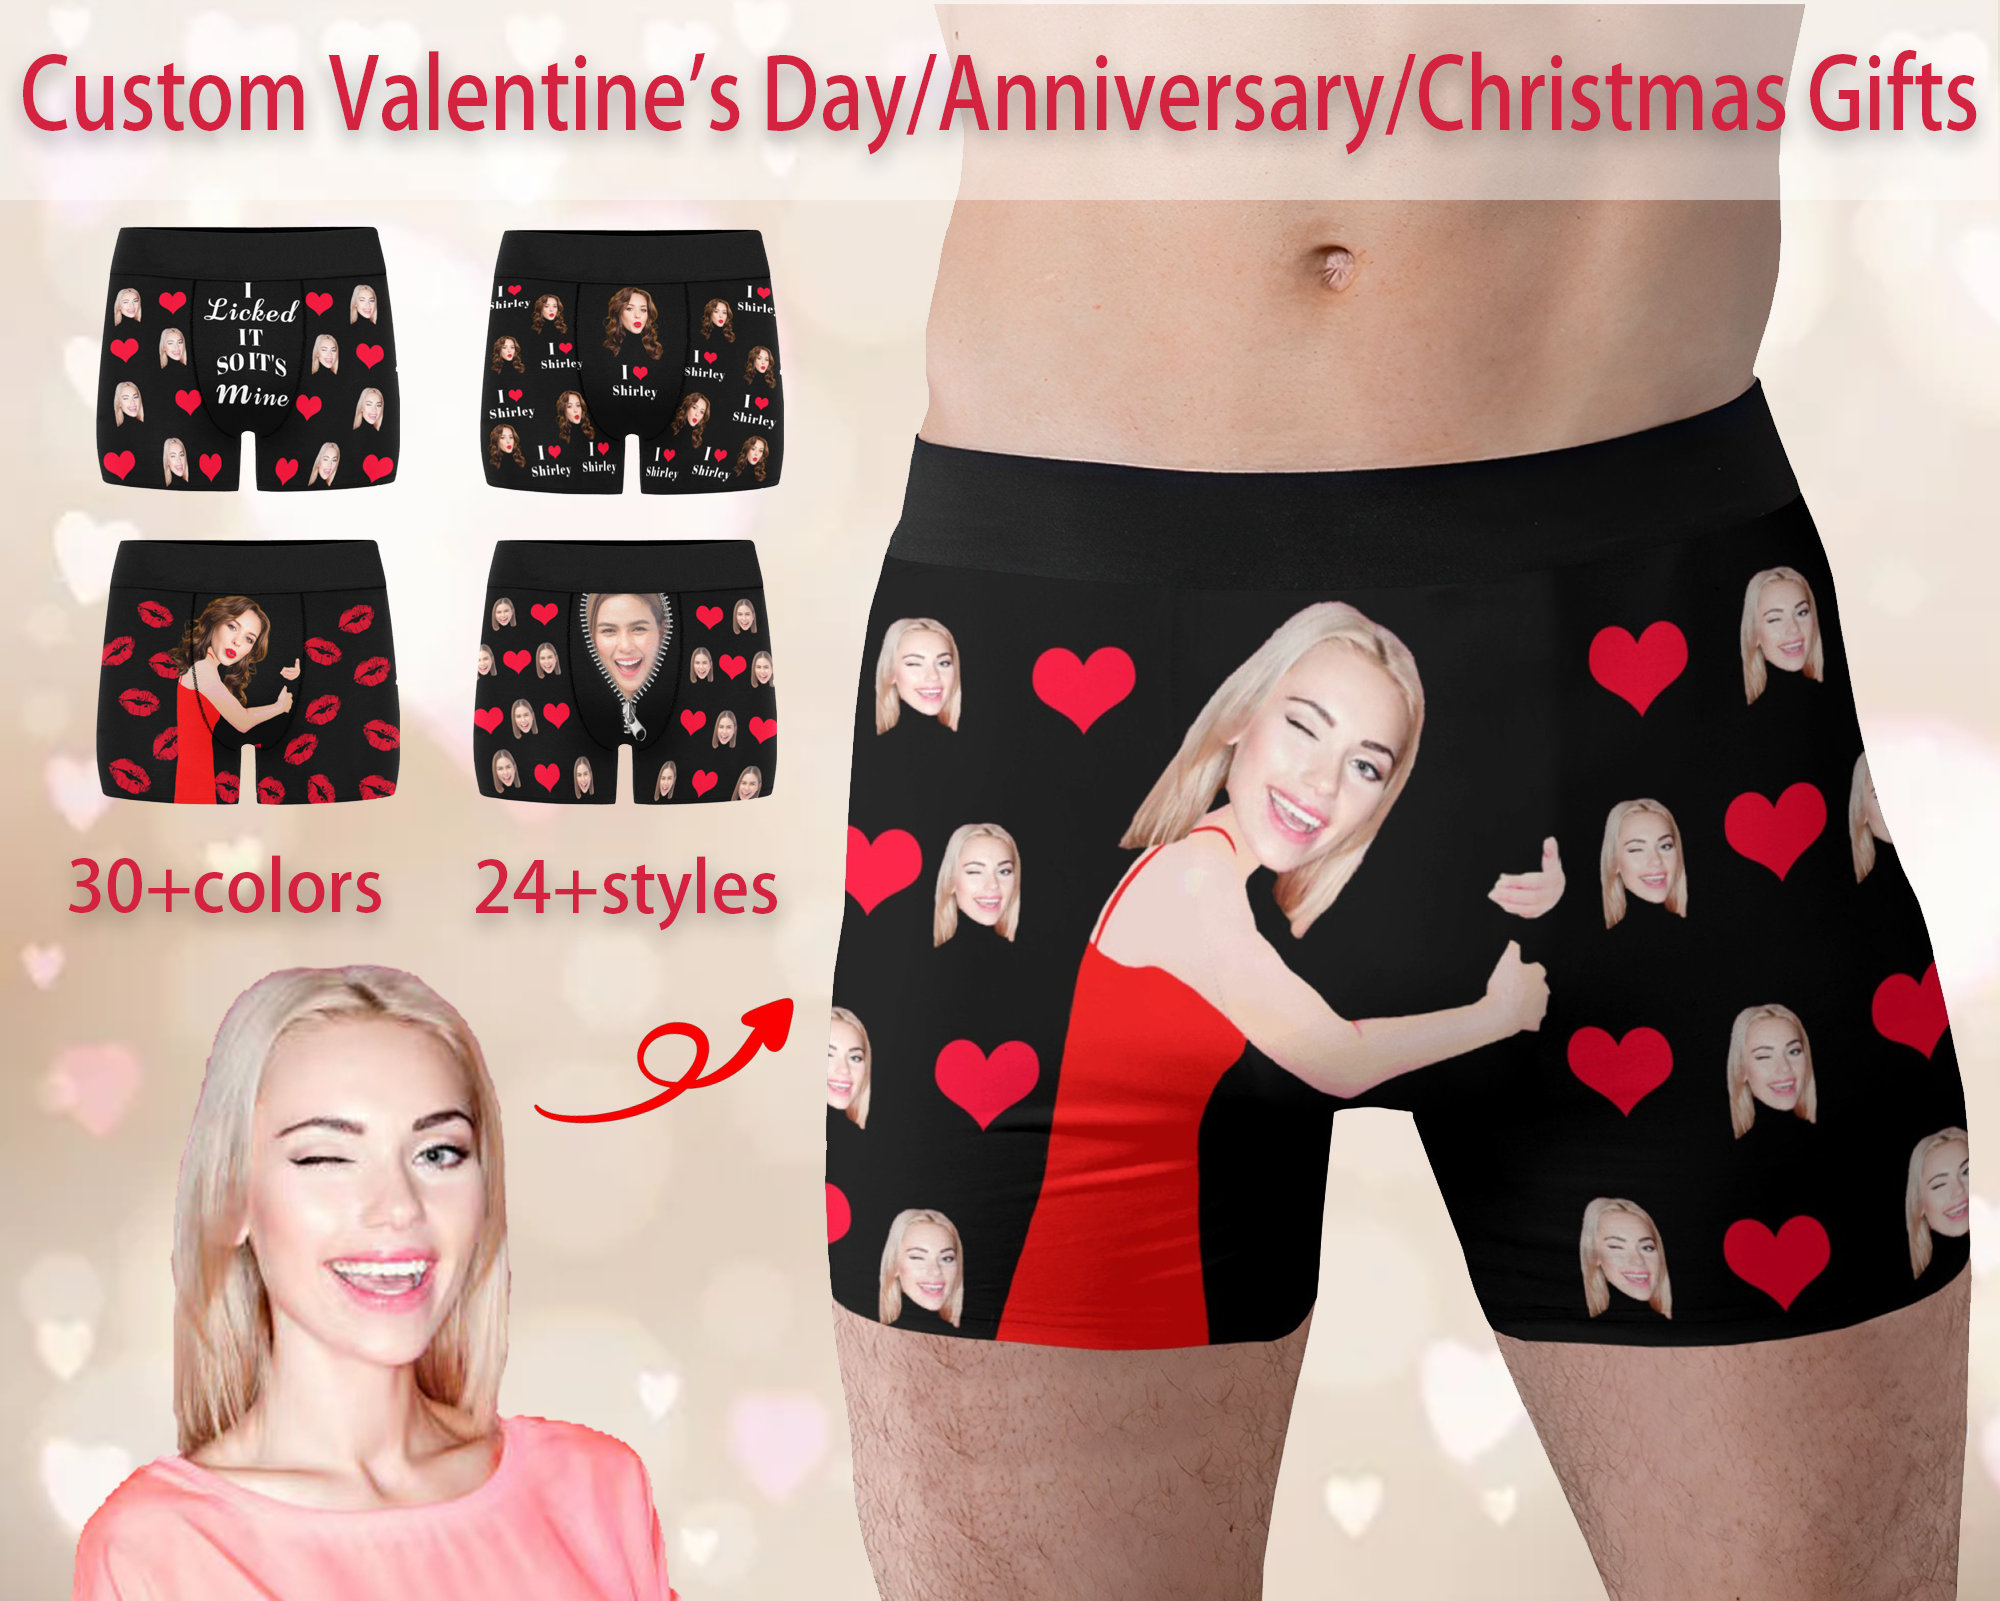 I Licked It so Its Mine/funny Boxer Briefs/ Valentine's Day Gift/ Gift for  Husband/boyfriend/ Anniversary Gift/ Gag Gift/bachelor Party Gift 